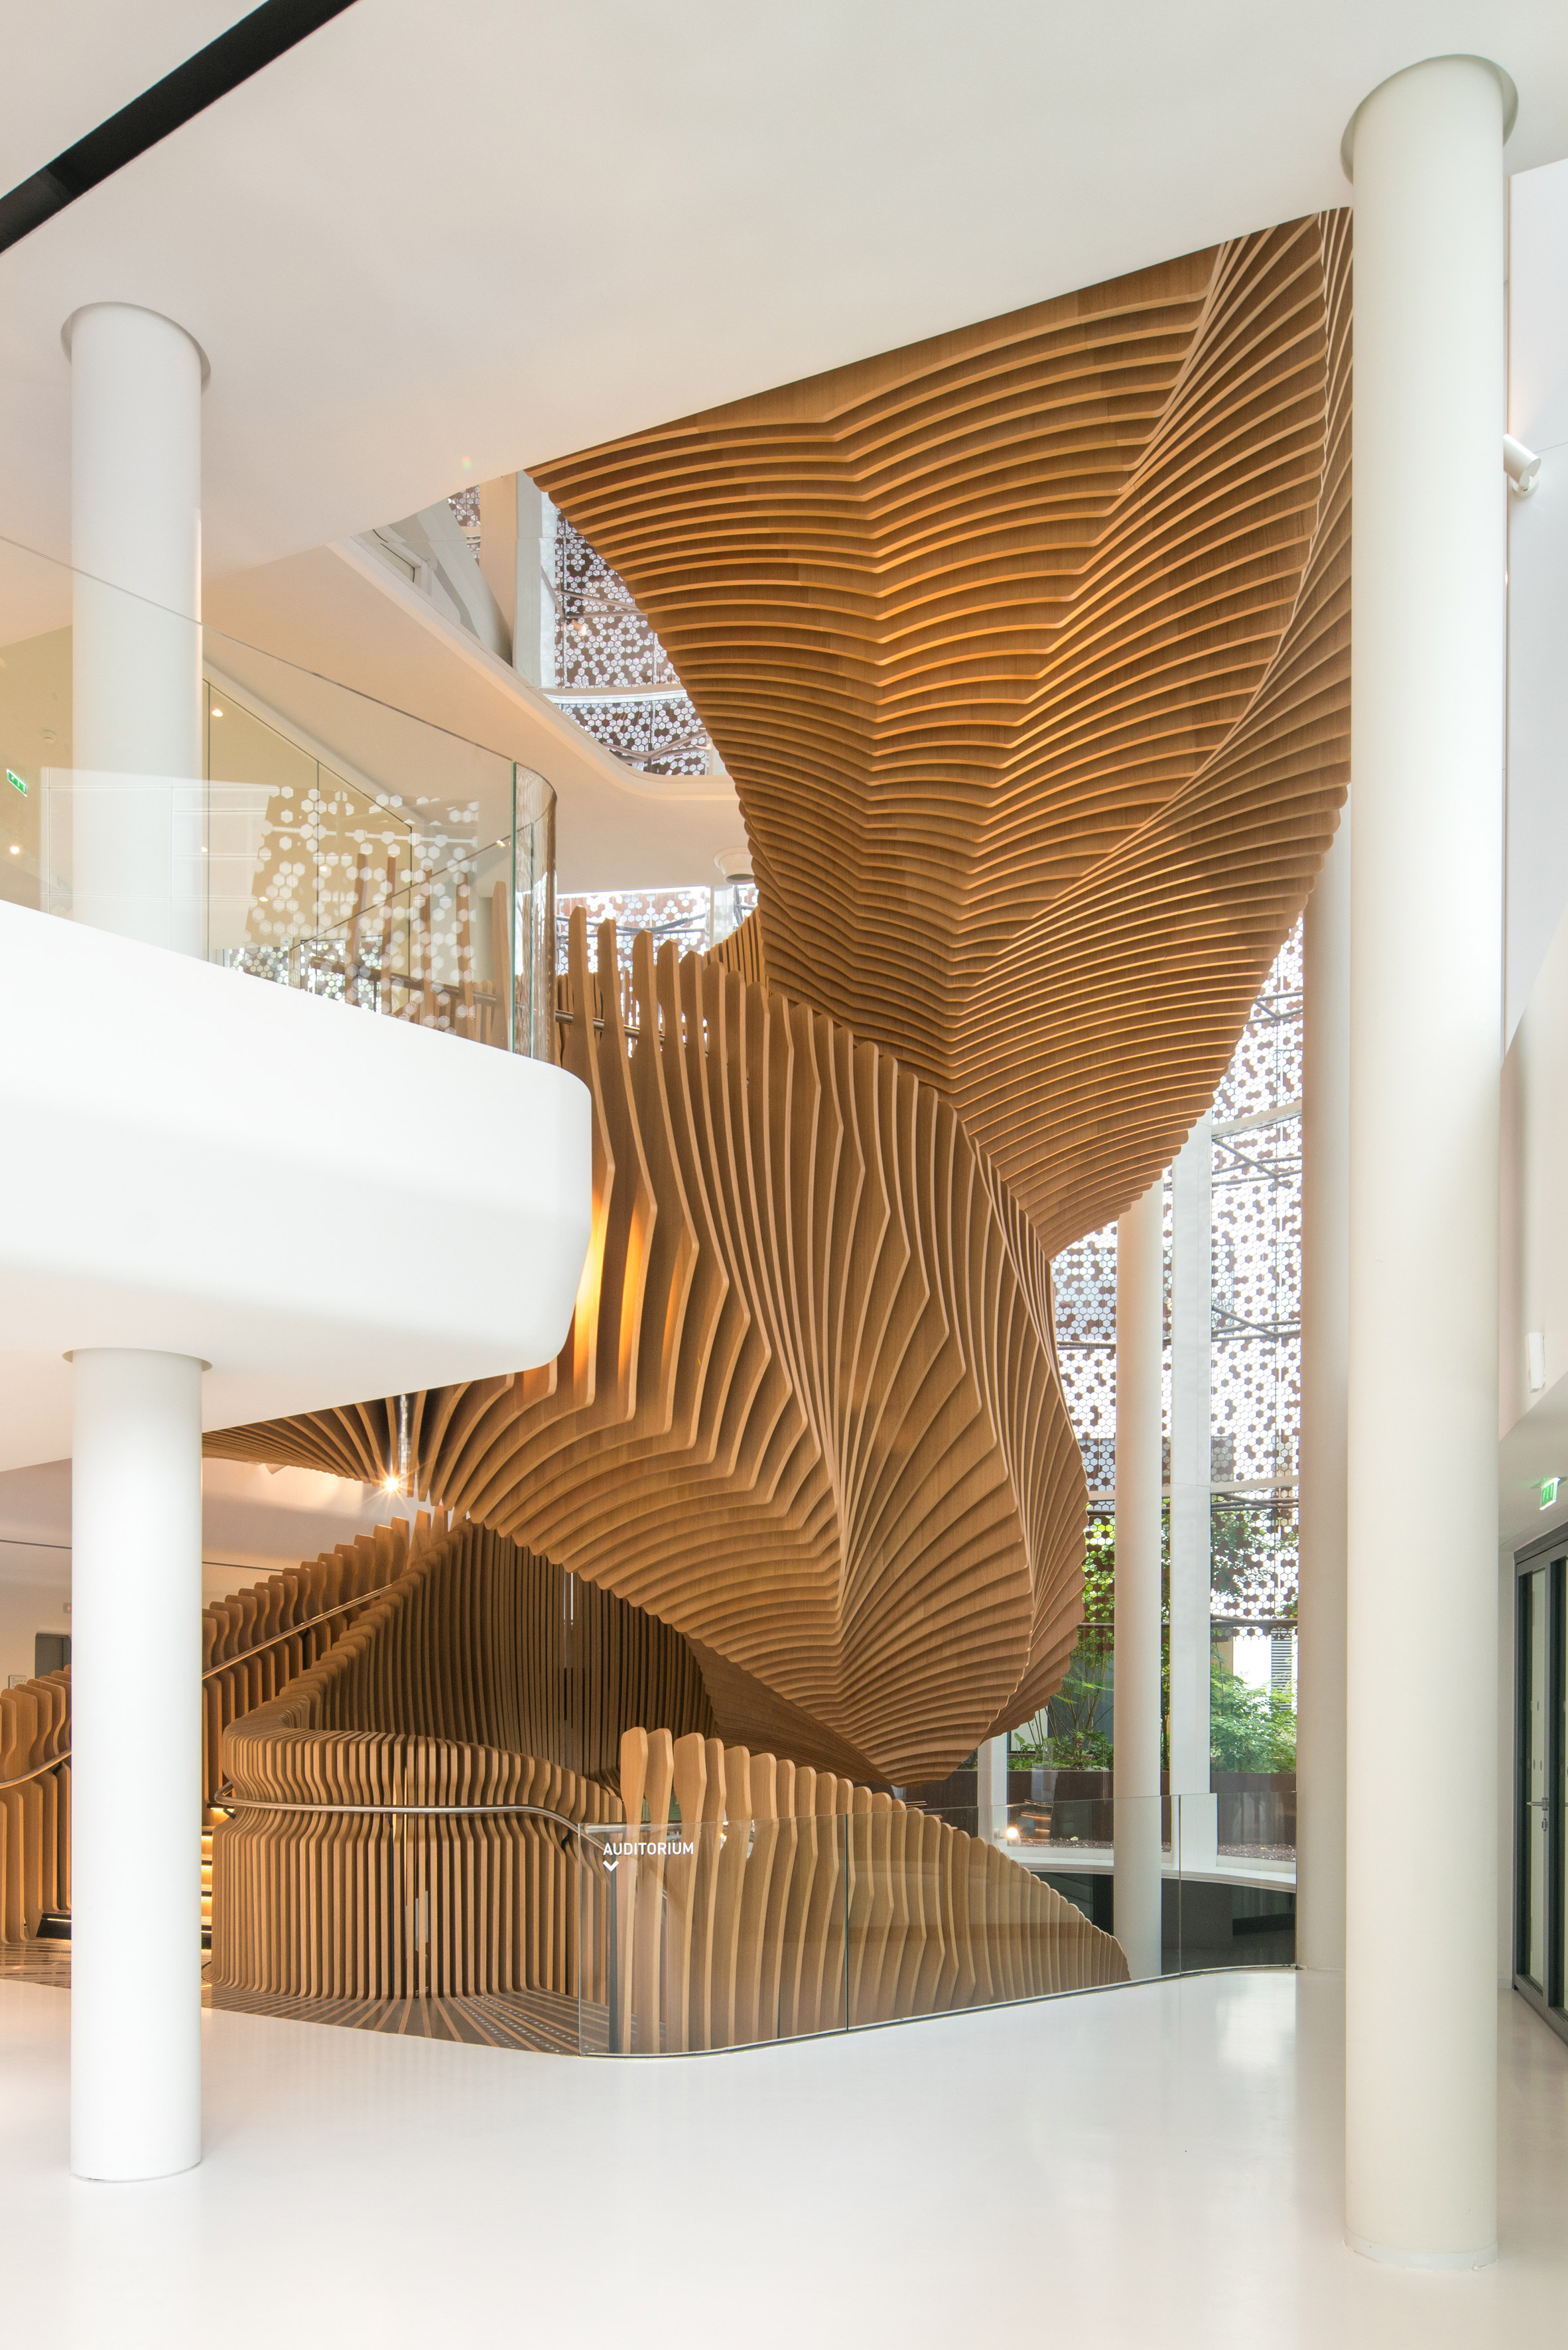 Ora Ïto uses hundreds of wooden slats for snaking oak stair at LVMH offices